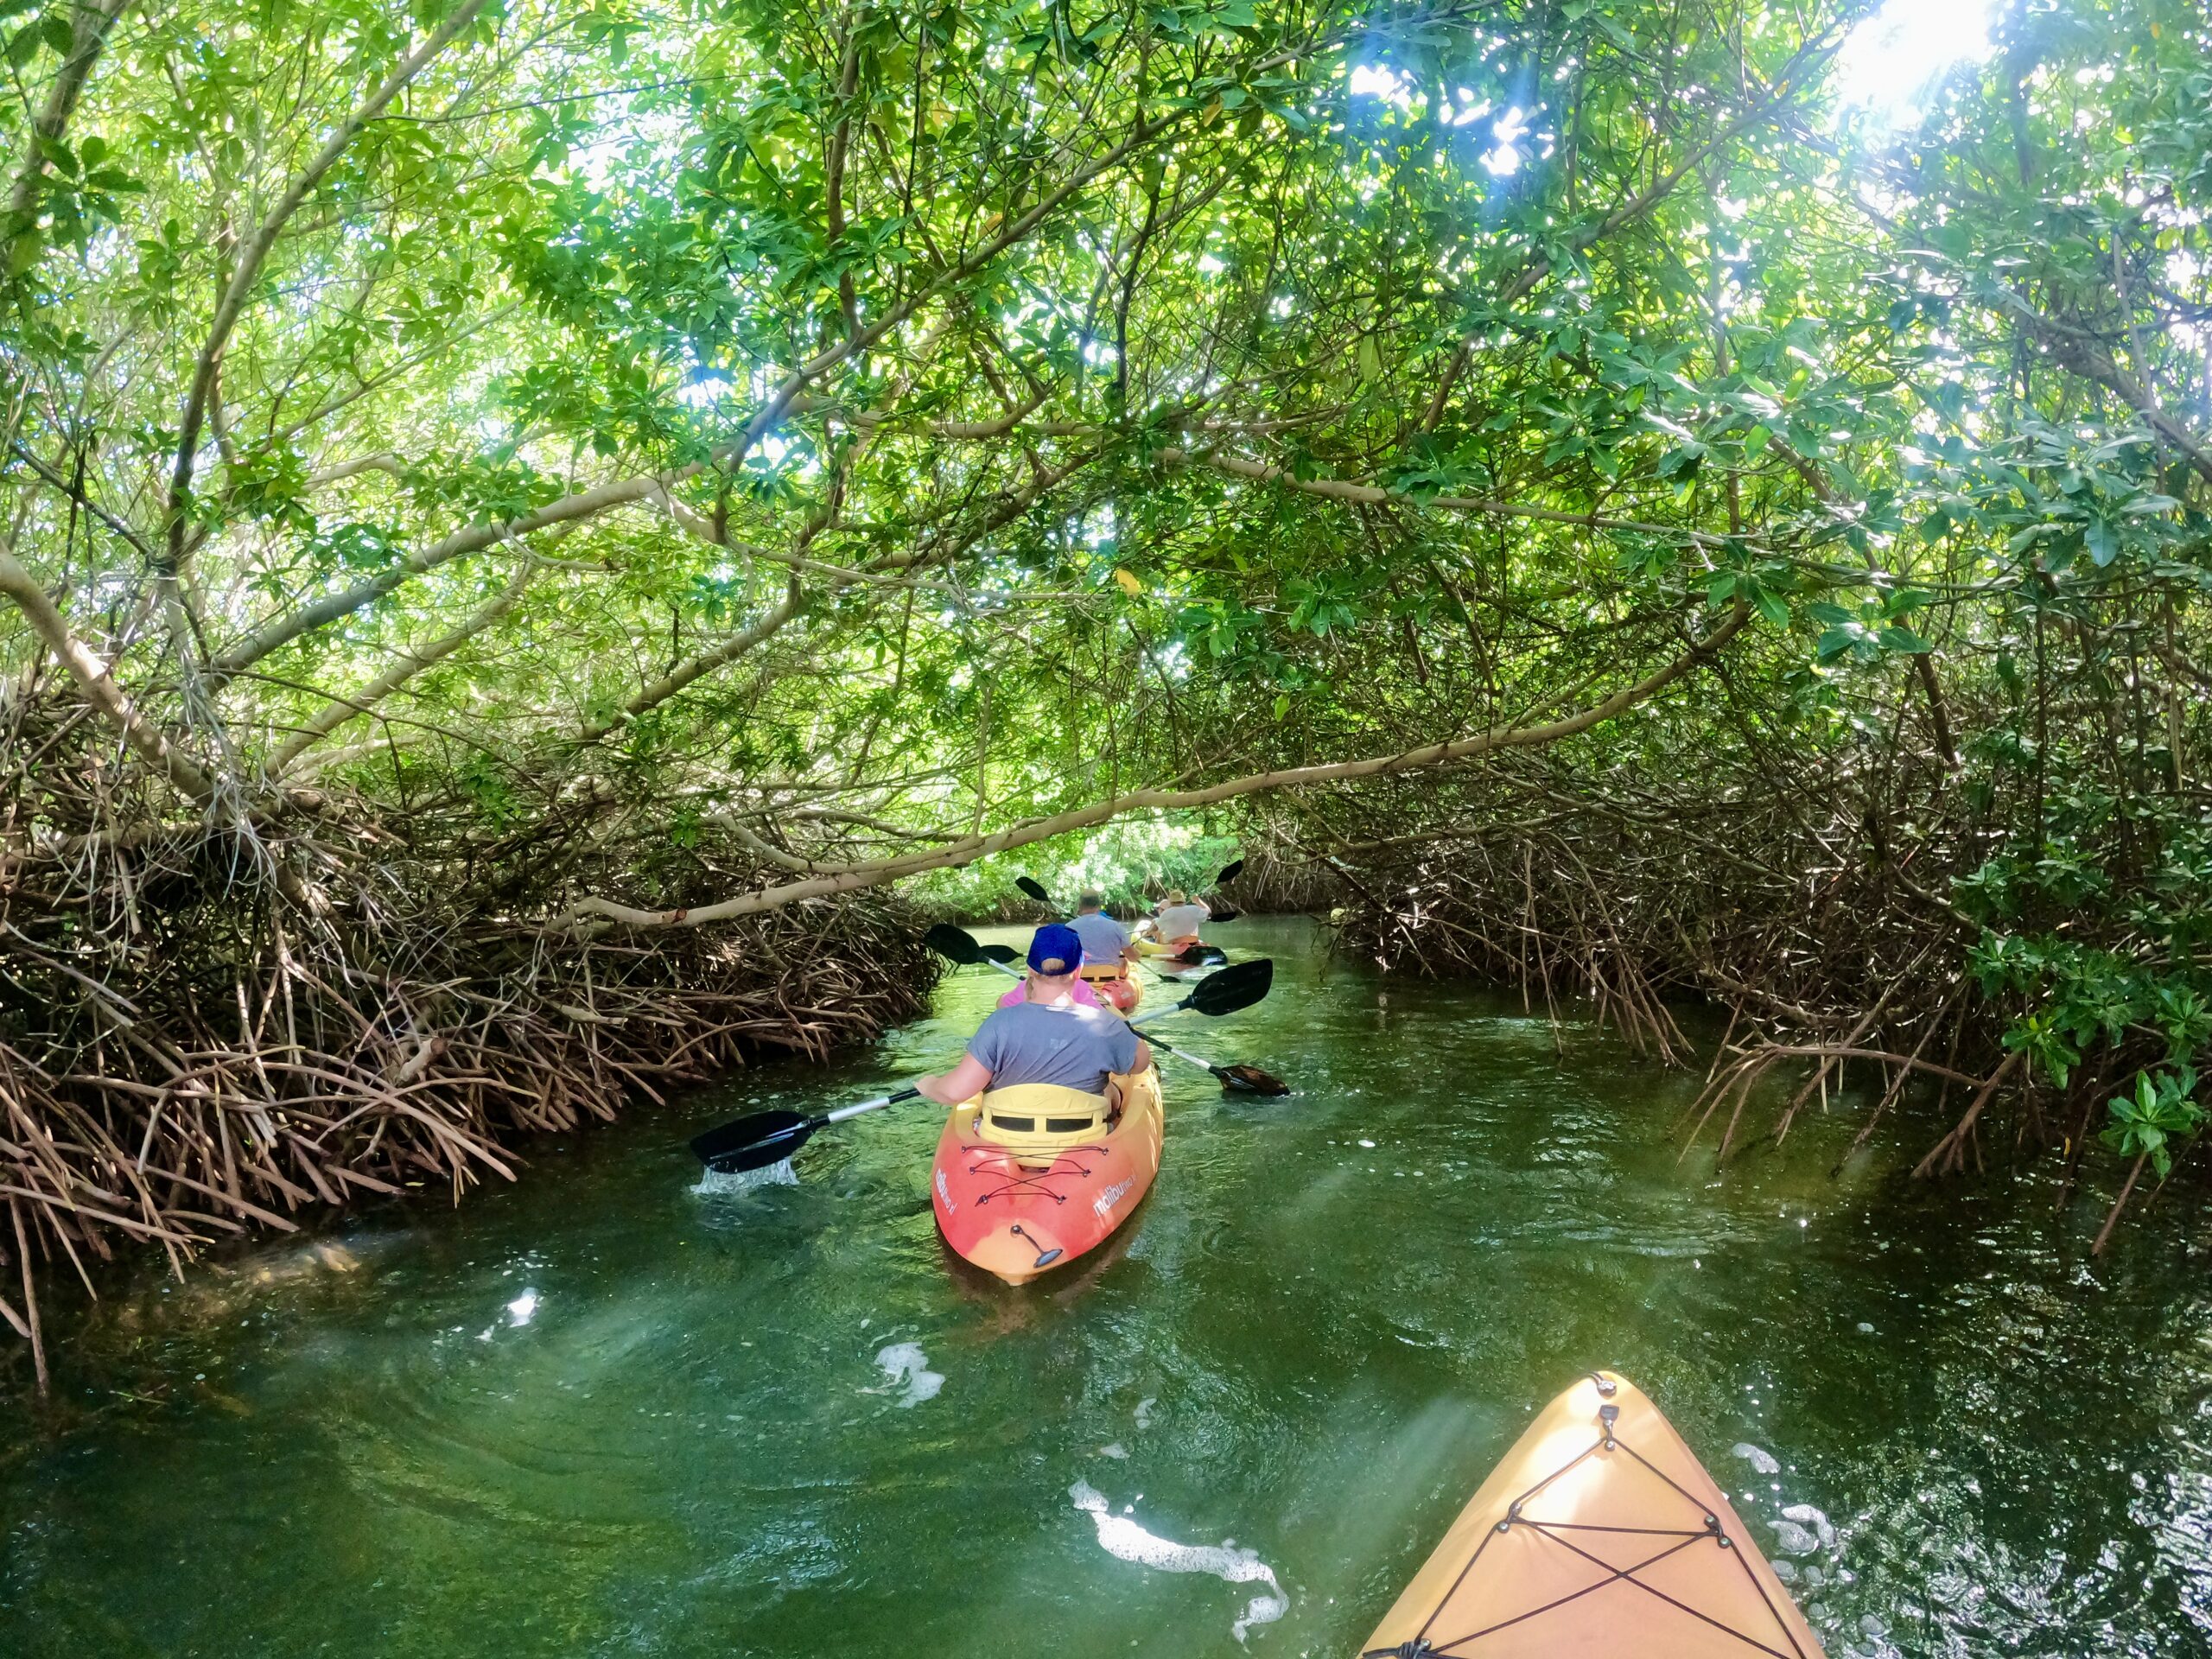 Go with a kayak through the Mangroves of Bonaire - organised by the mangrove kayak center Bonaire